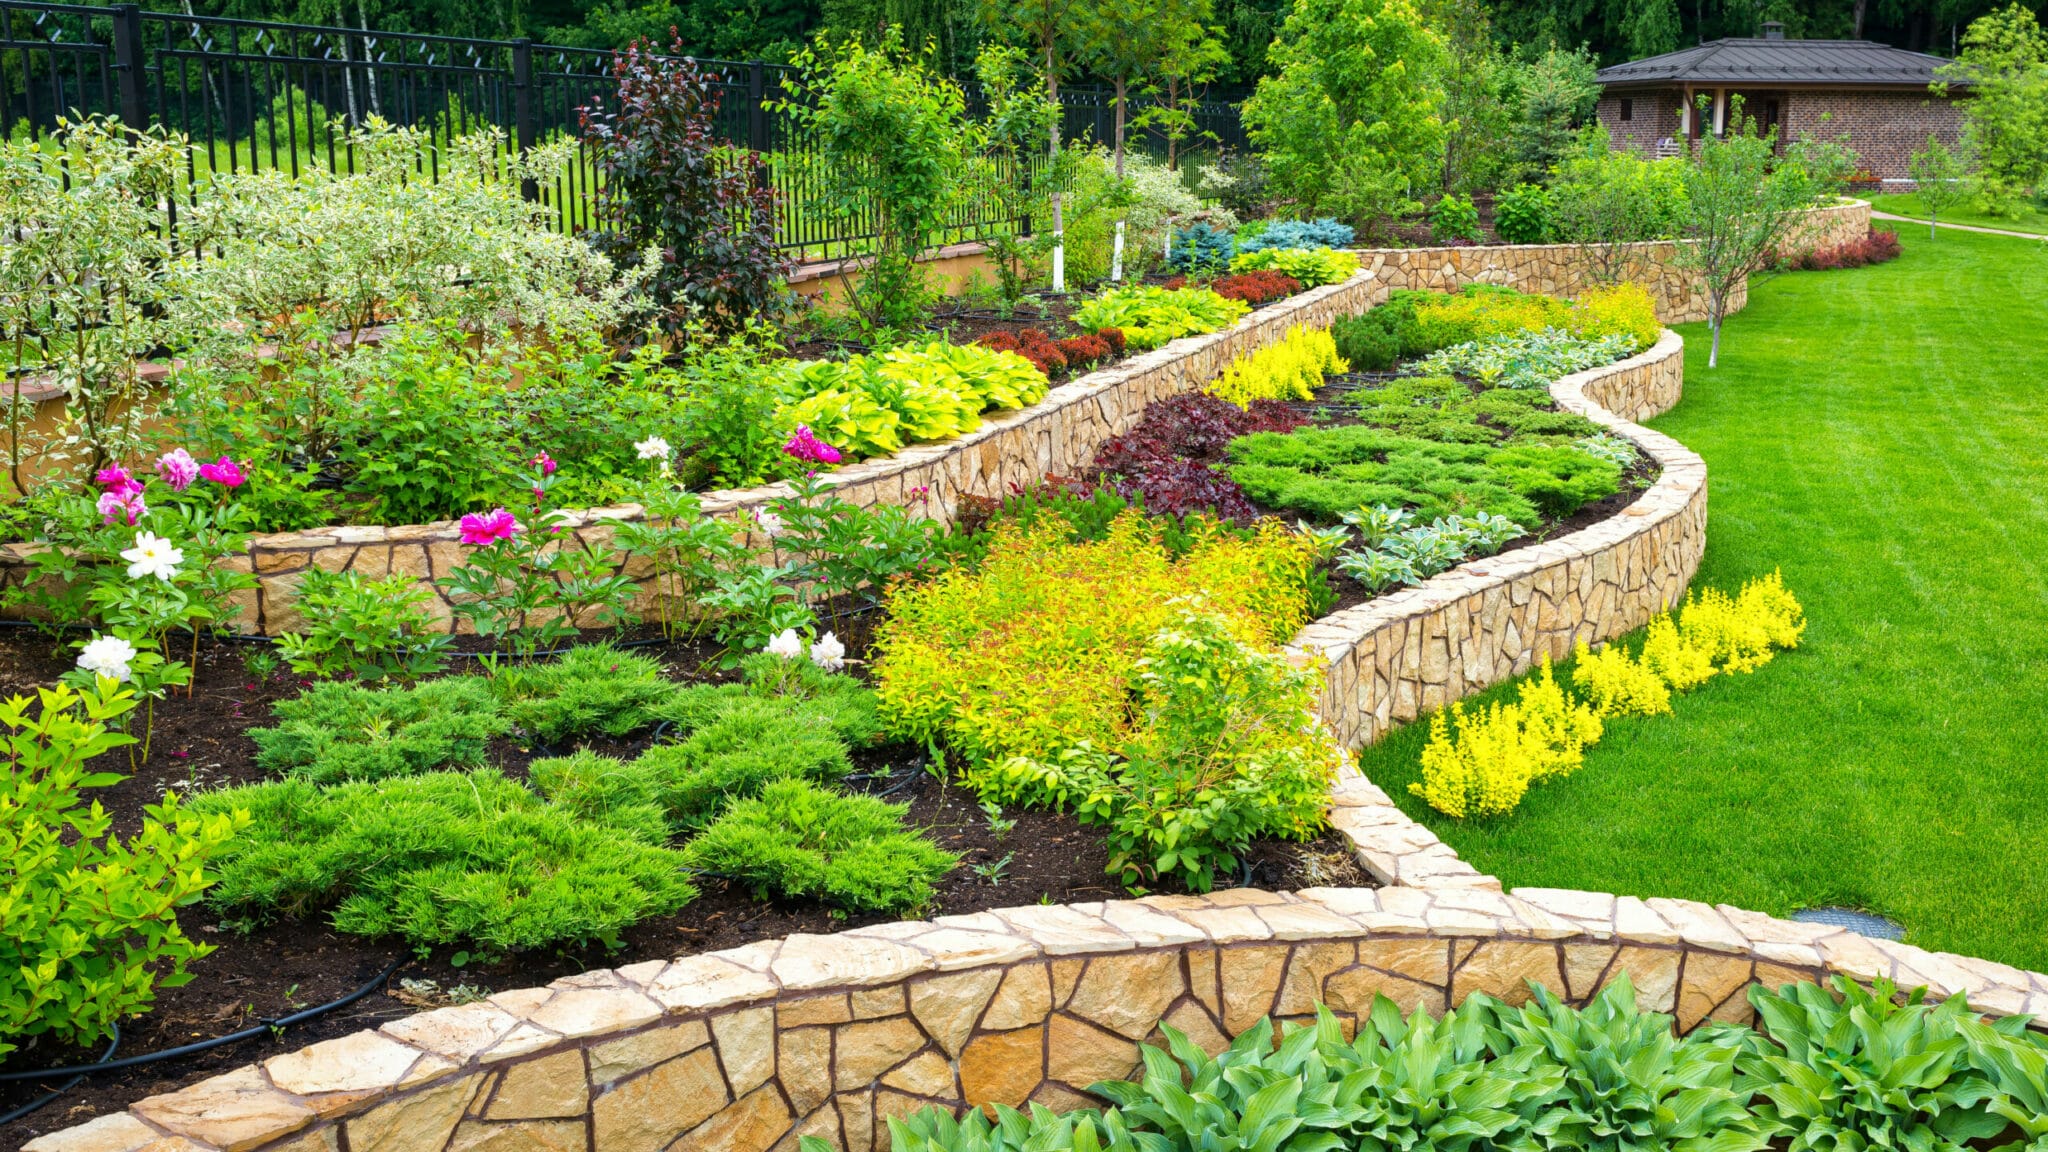 How Much Does Landscaping Cost in Ontario